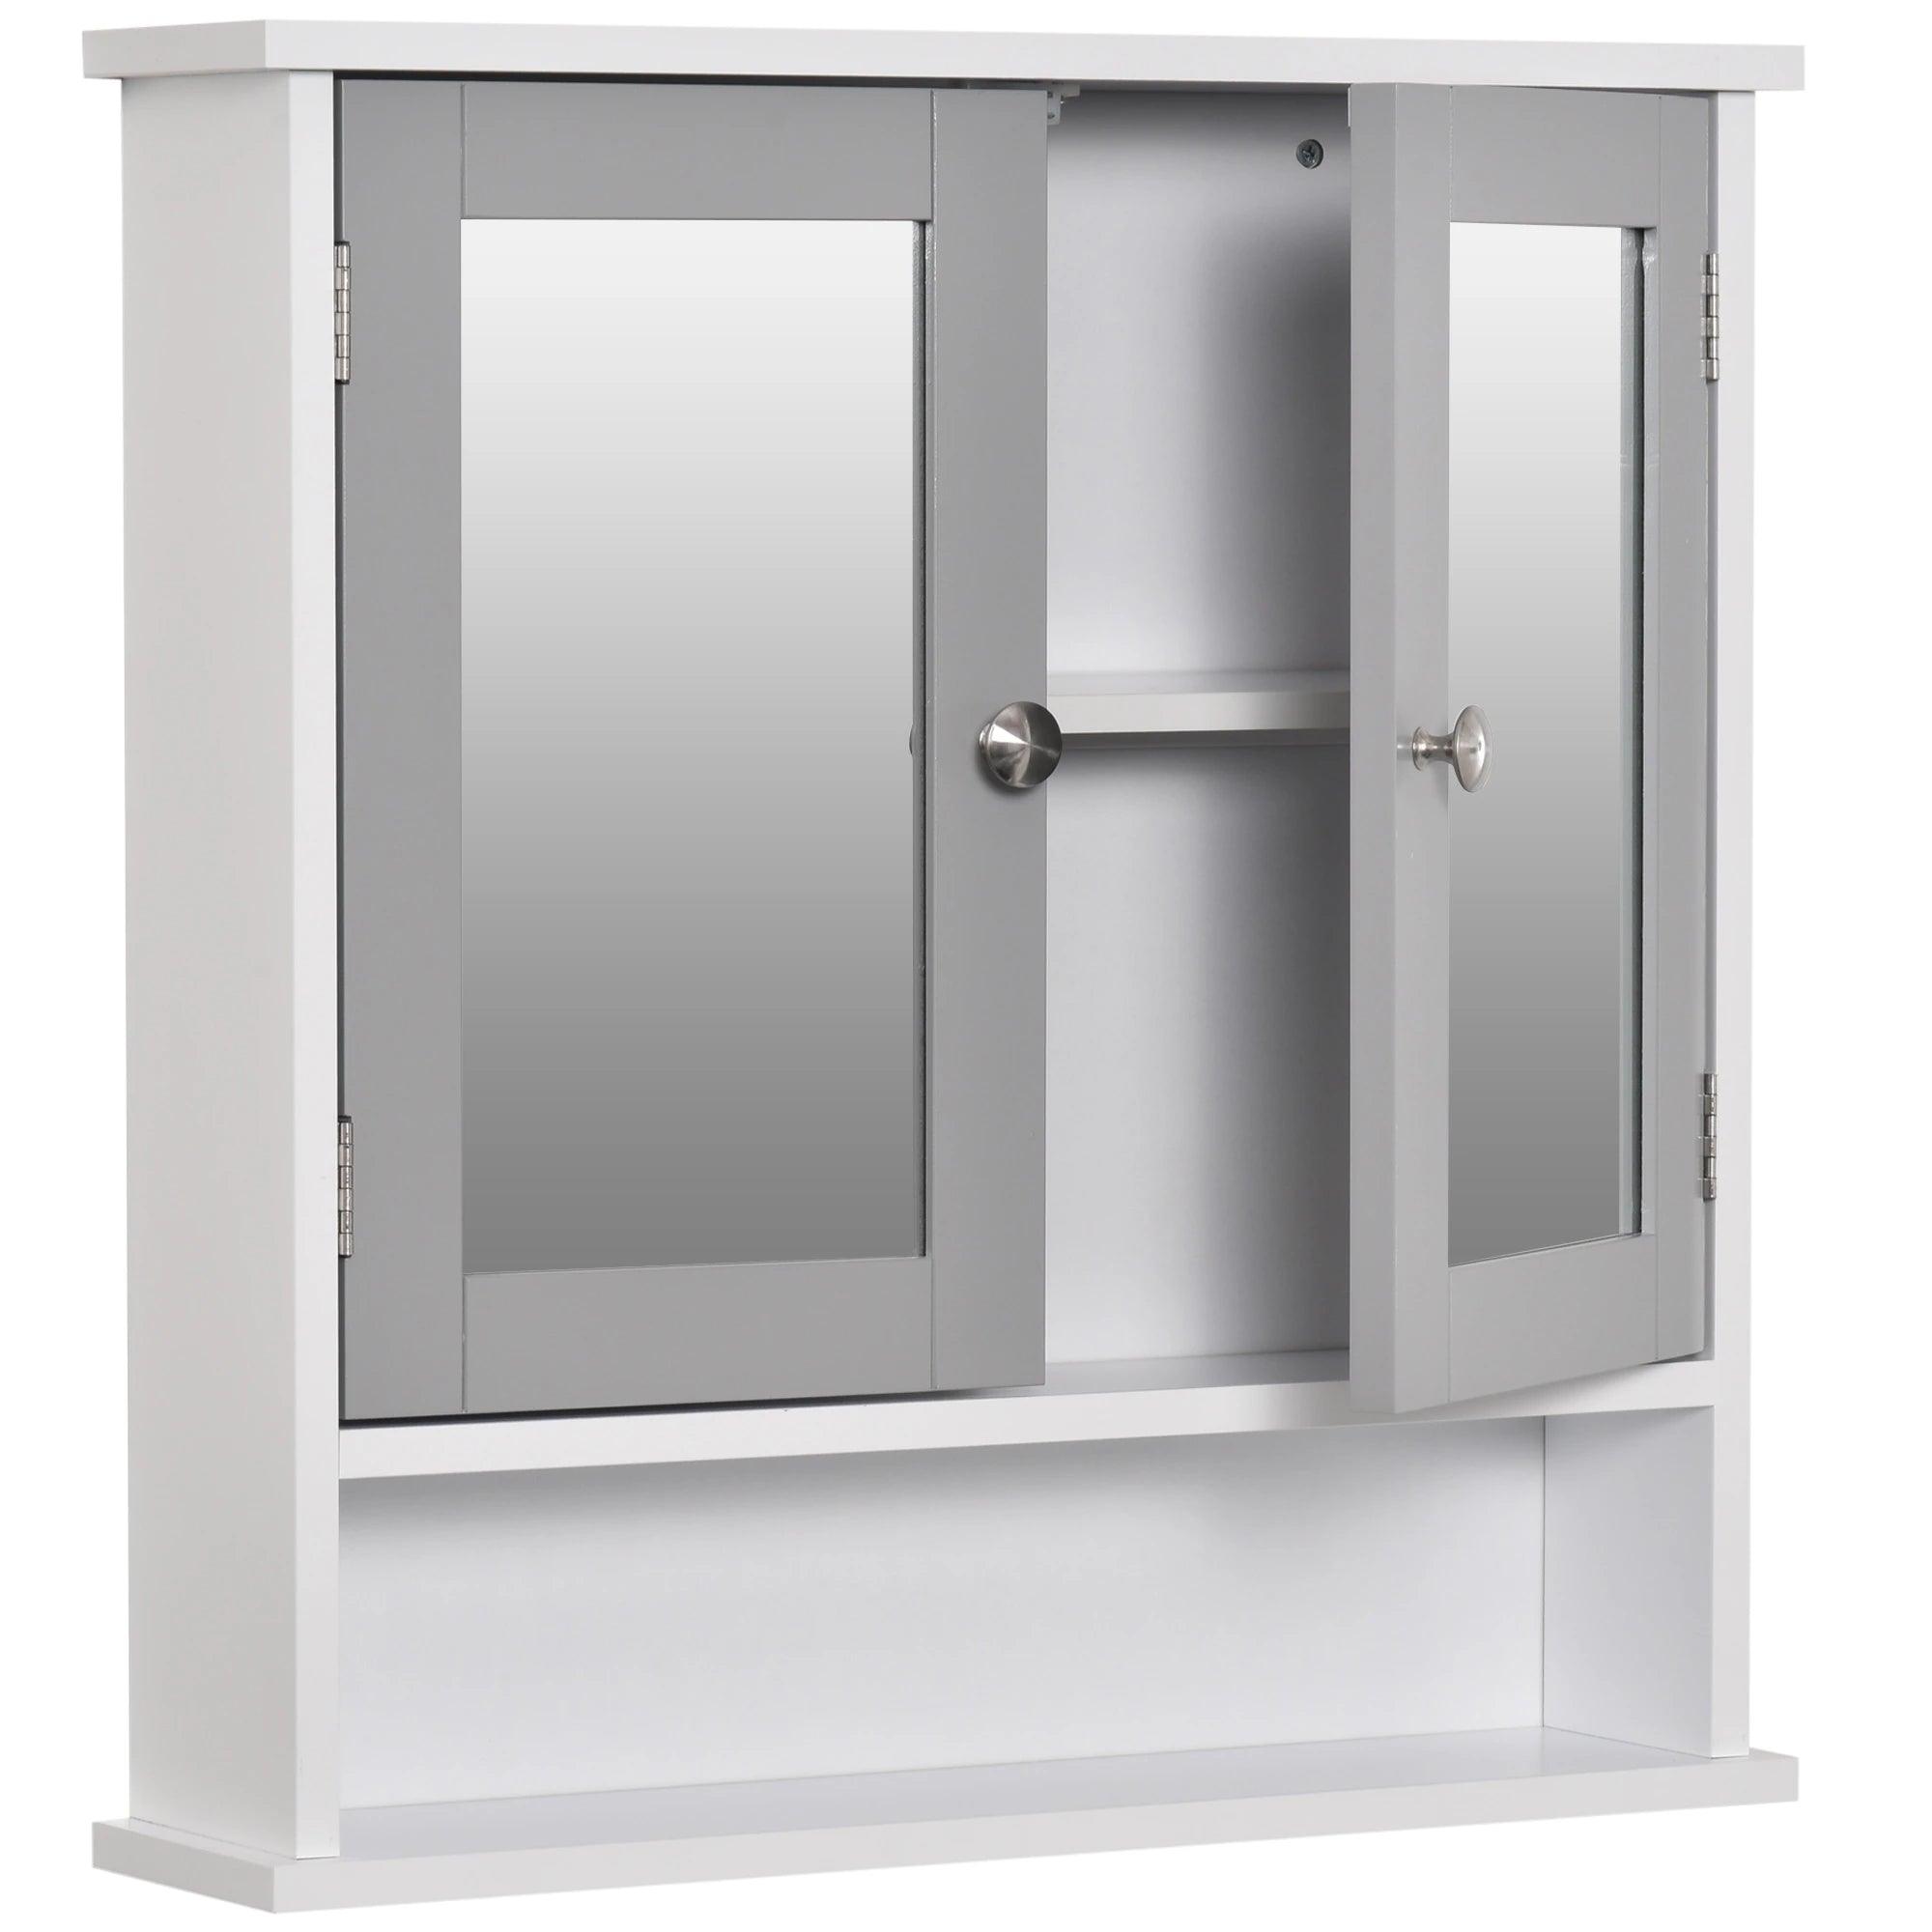 Bathroom Mirror Cabinet, Wall Mounted with Double Mirrored Doors, Hanging Cabinet